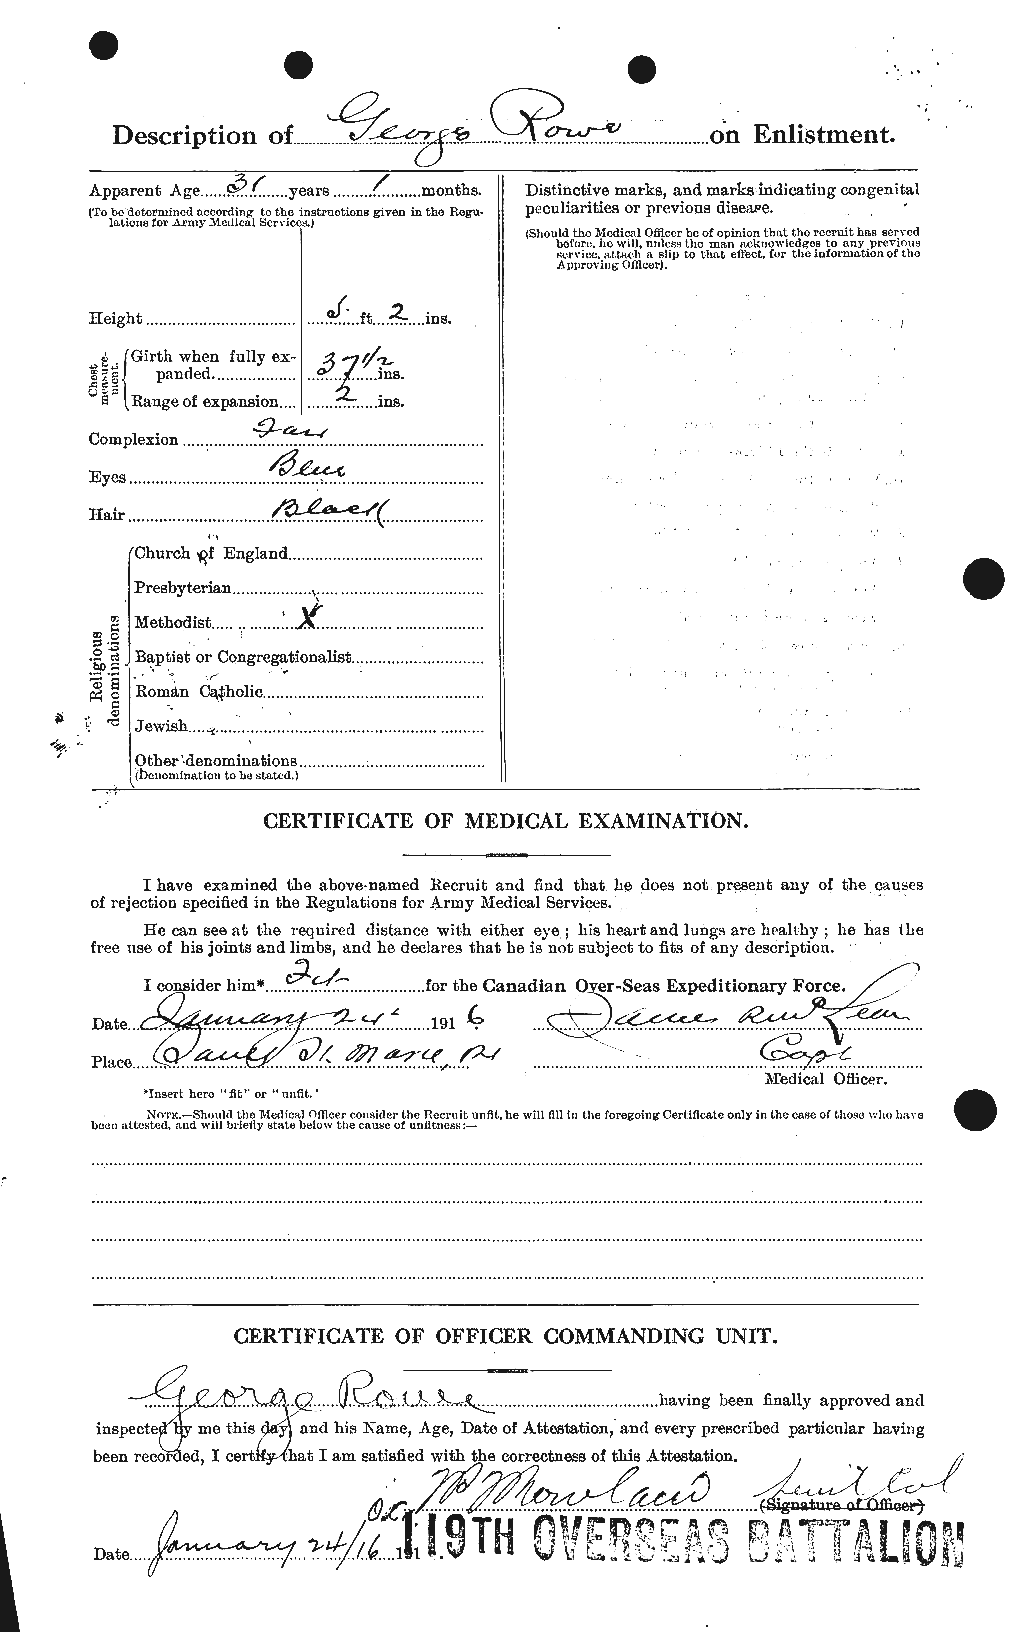 Personnel Records of the First World War - CEF 615873b